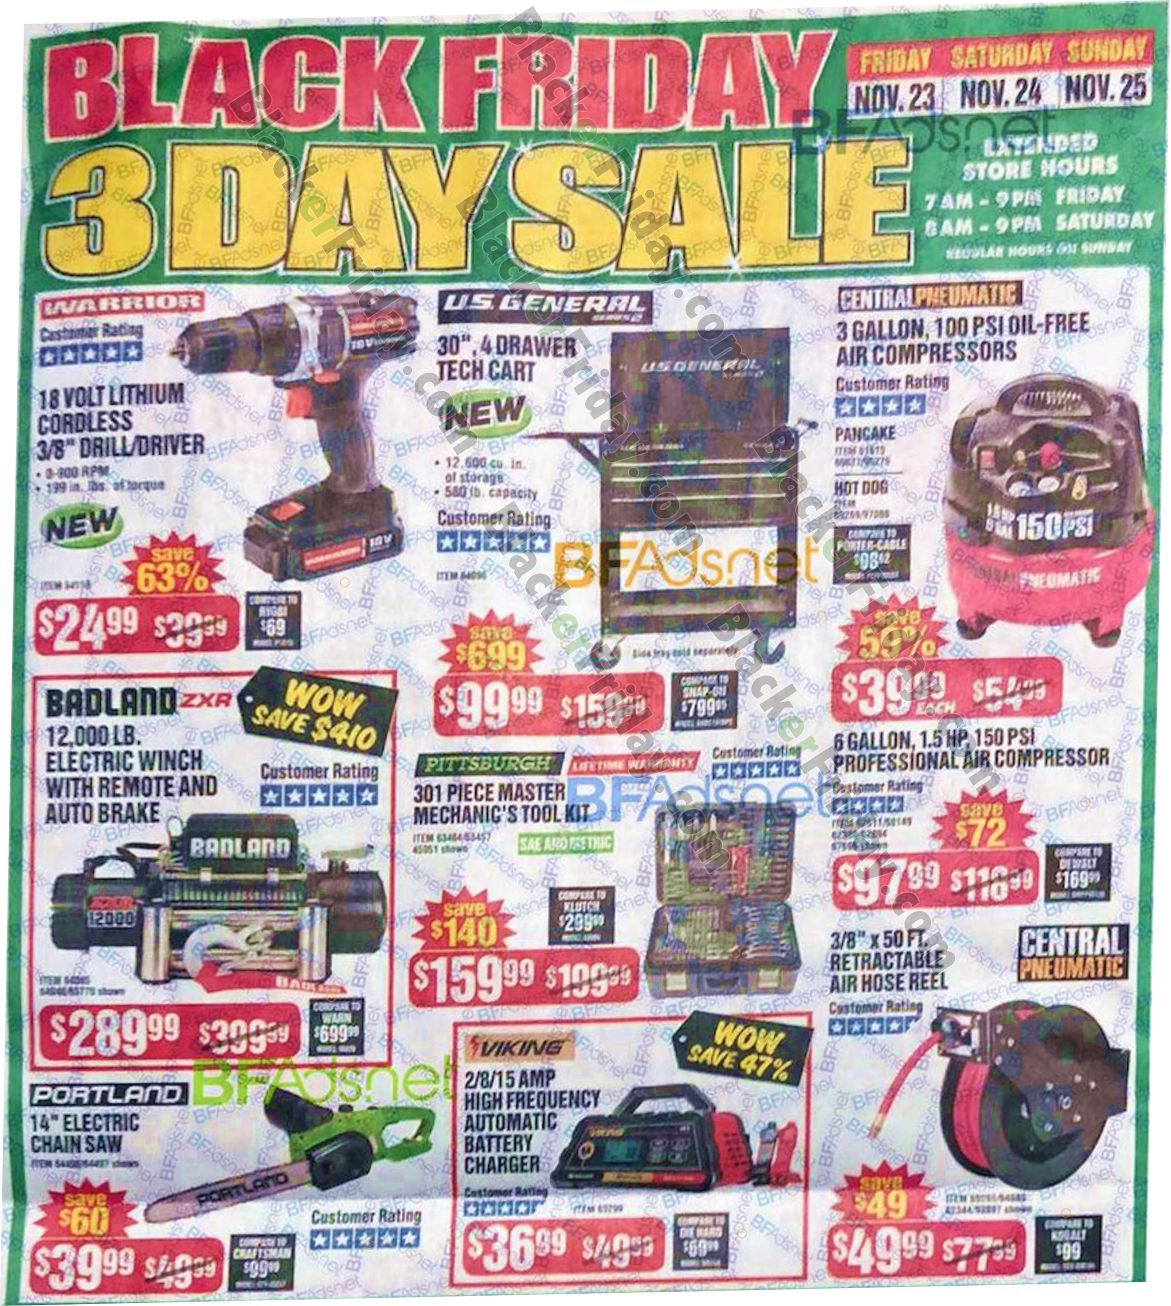 Harbor Freight Tools Black Friday 2021 Sale What To Expect Blacker Friday